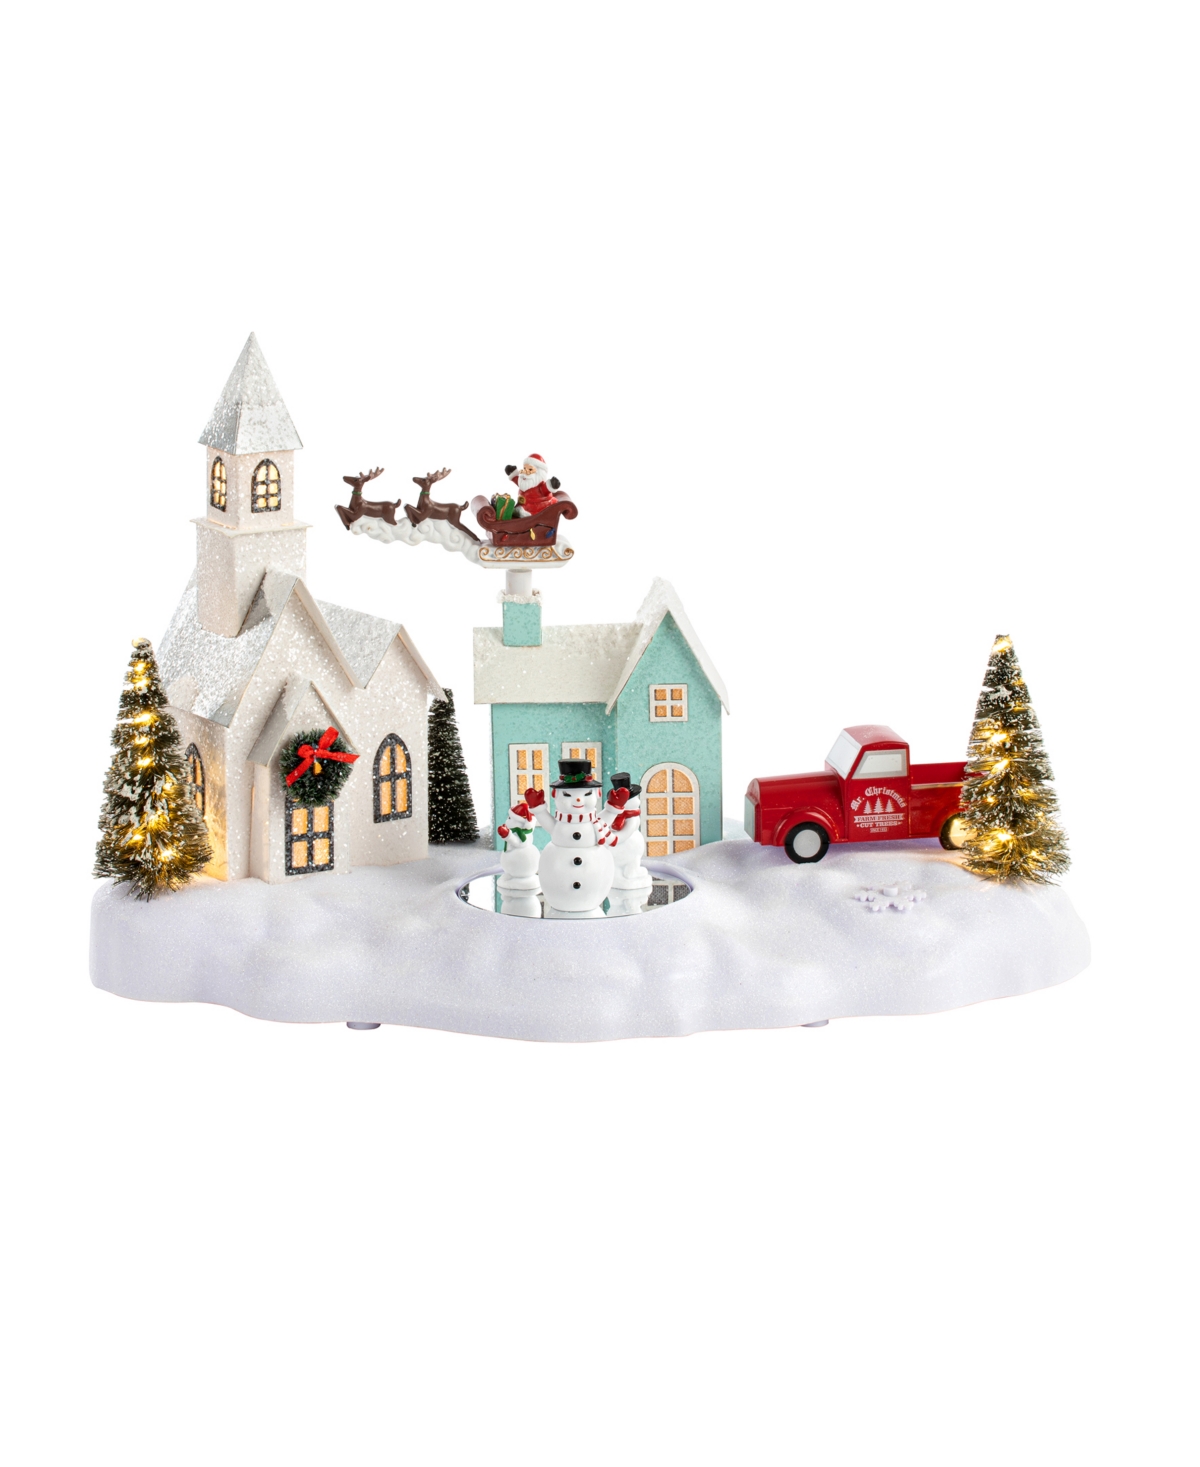 Mr. Christmas 17" Animated Musical Vintage-like Village In White